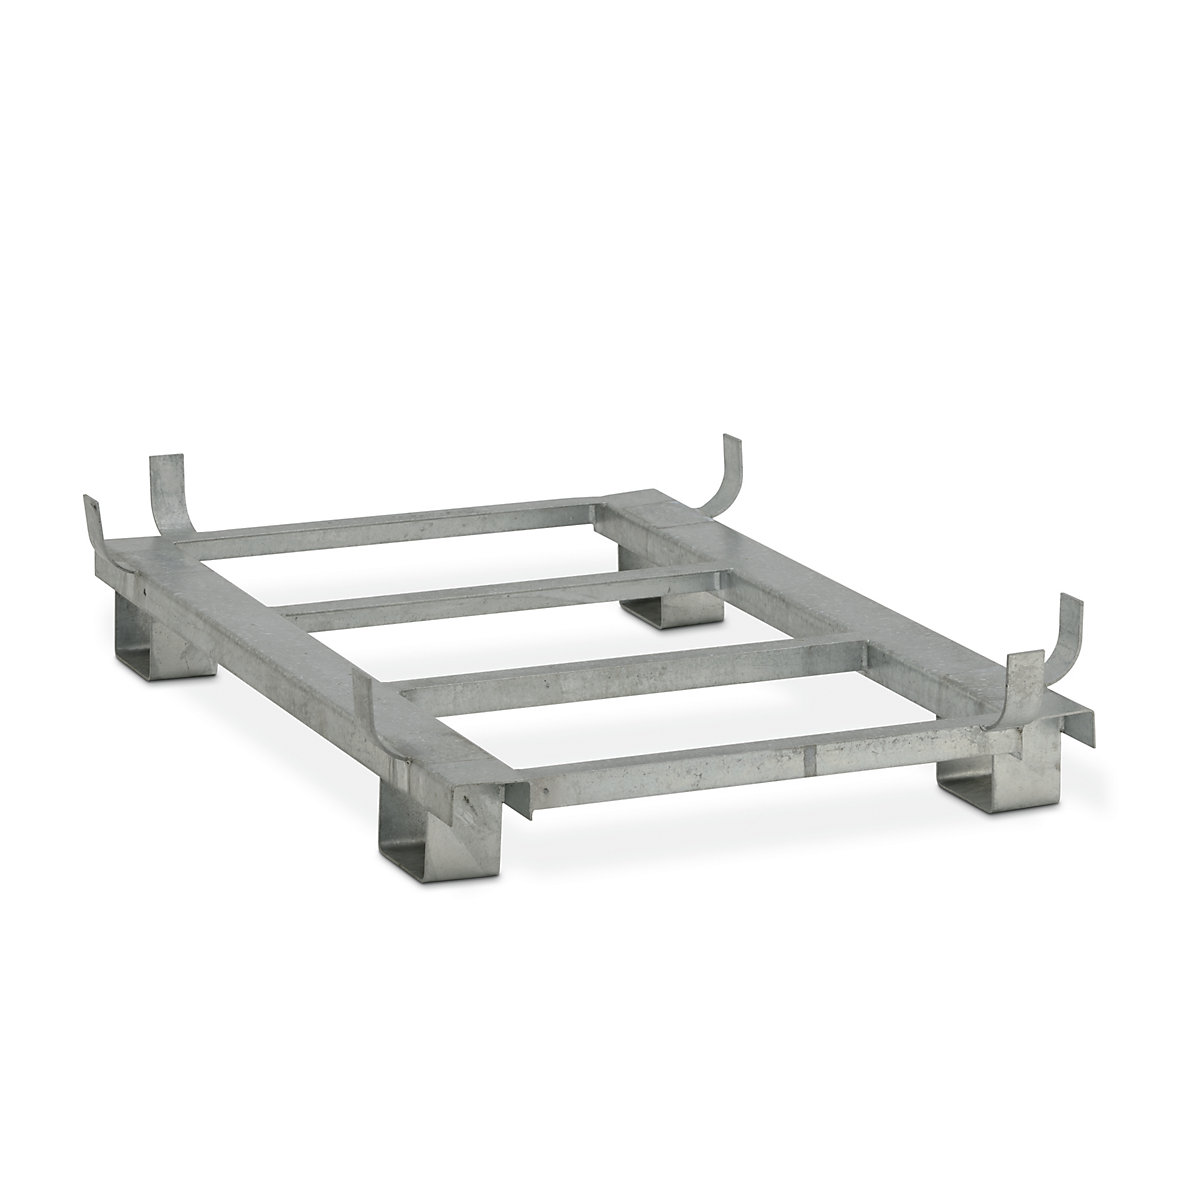 Steel base frame – CEMO, zinc plated, for LxW 1620 x 1190 mm, capacity 1100 litres